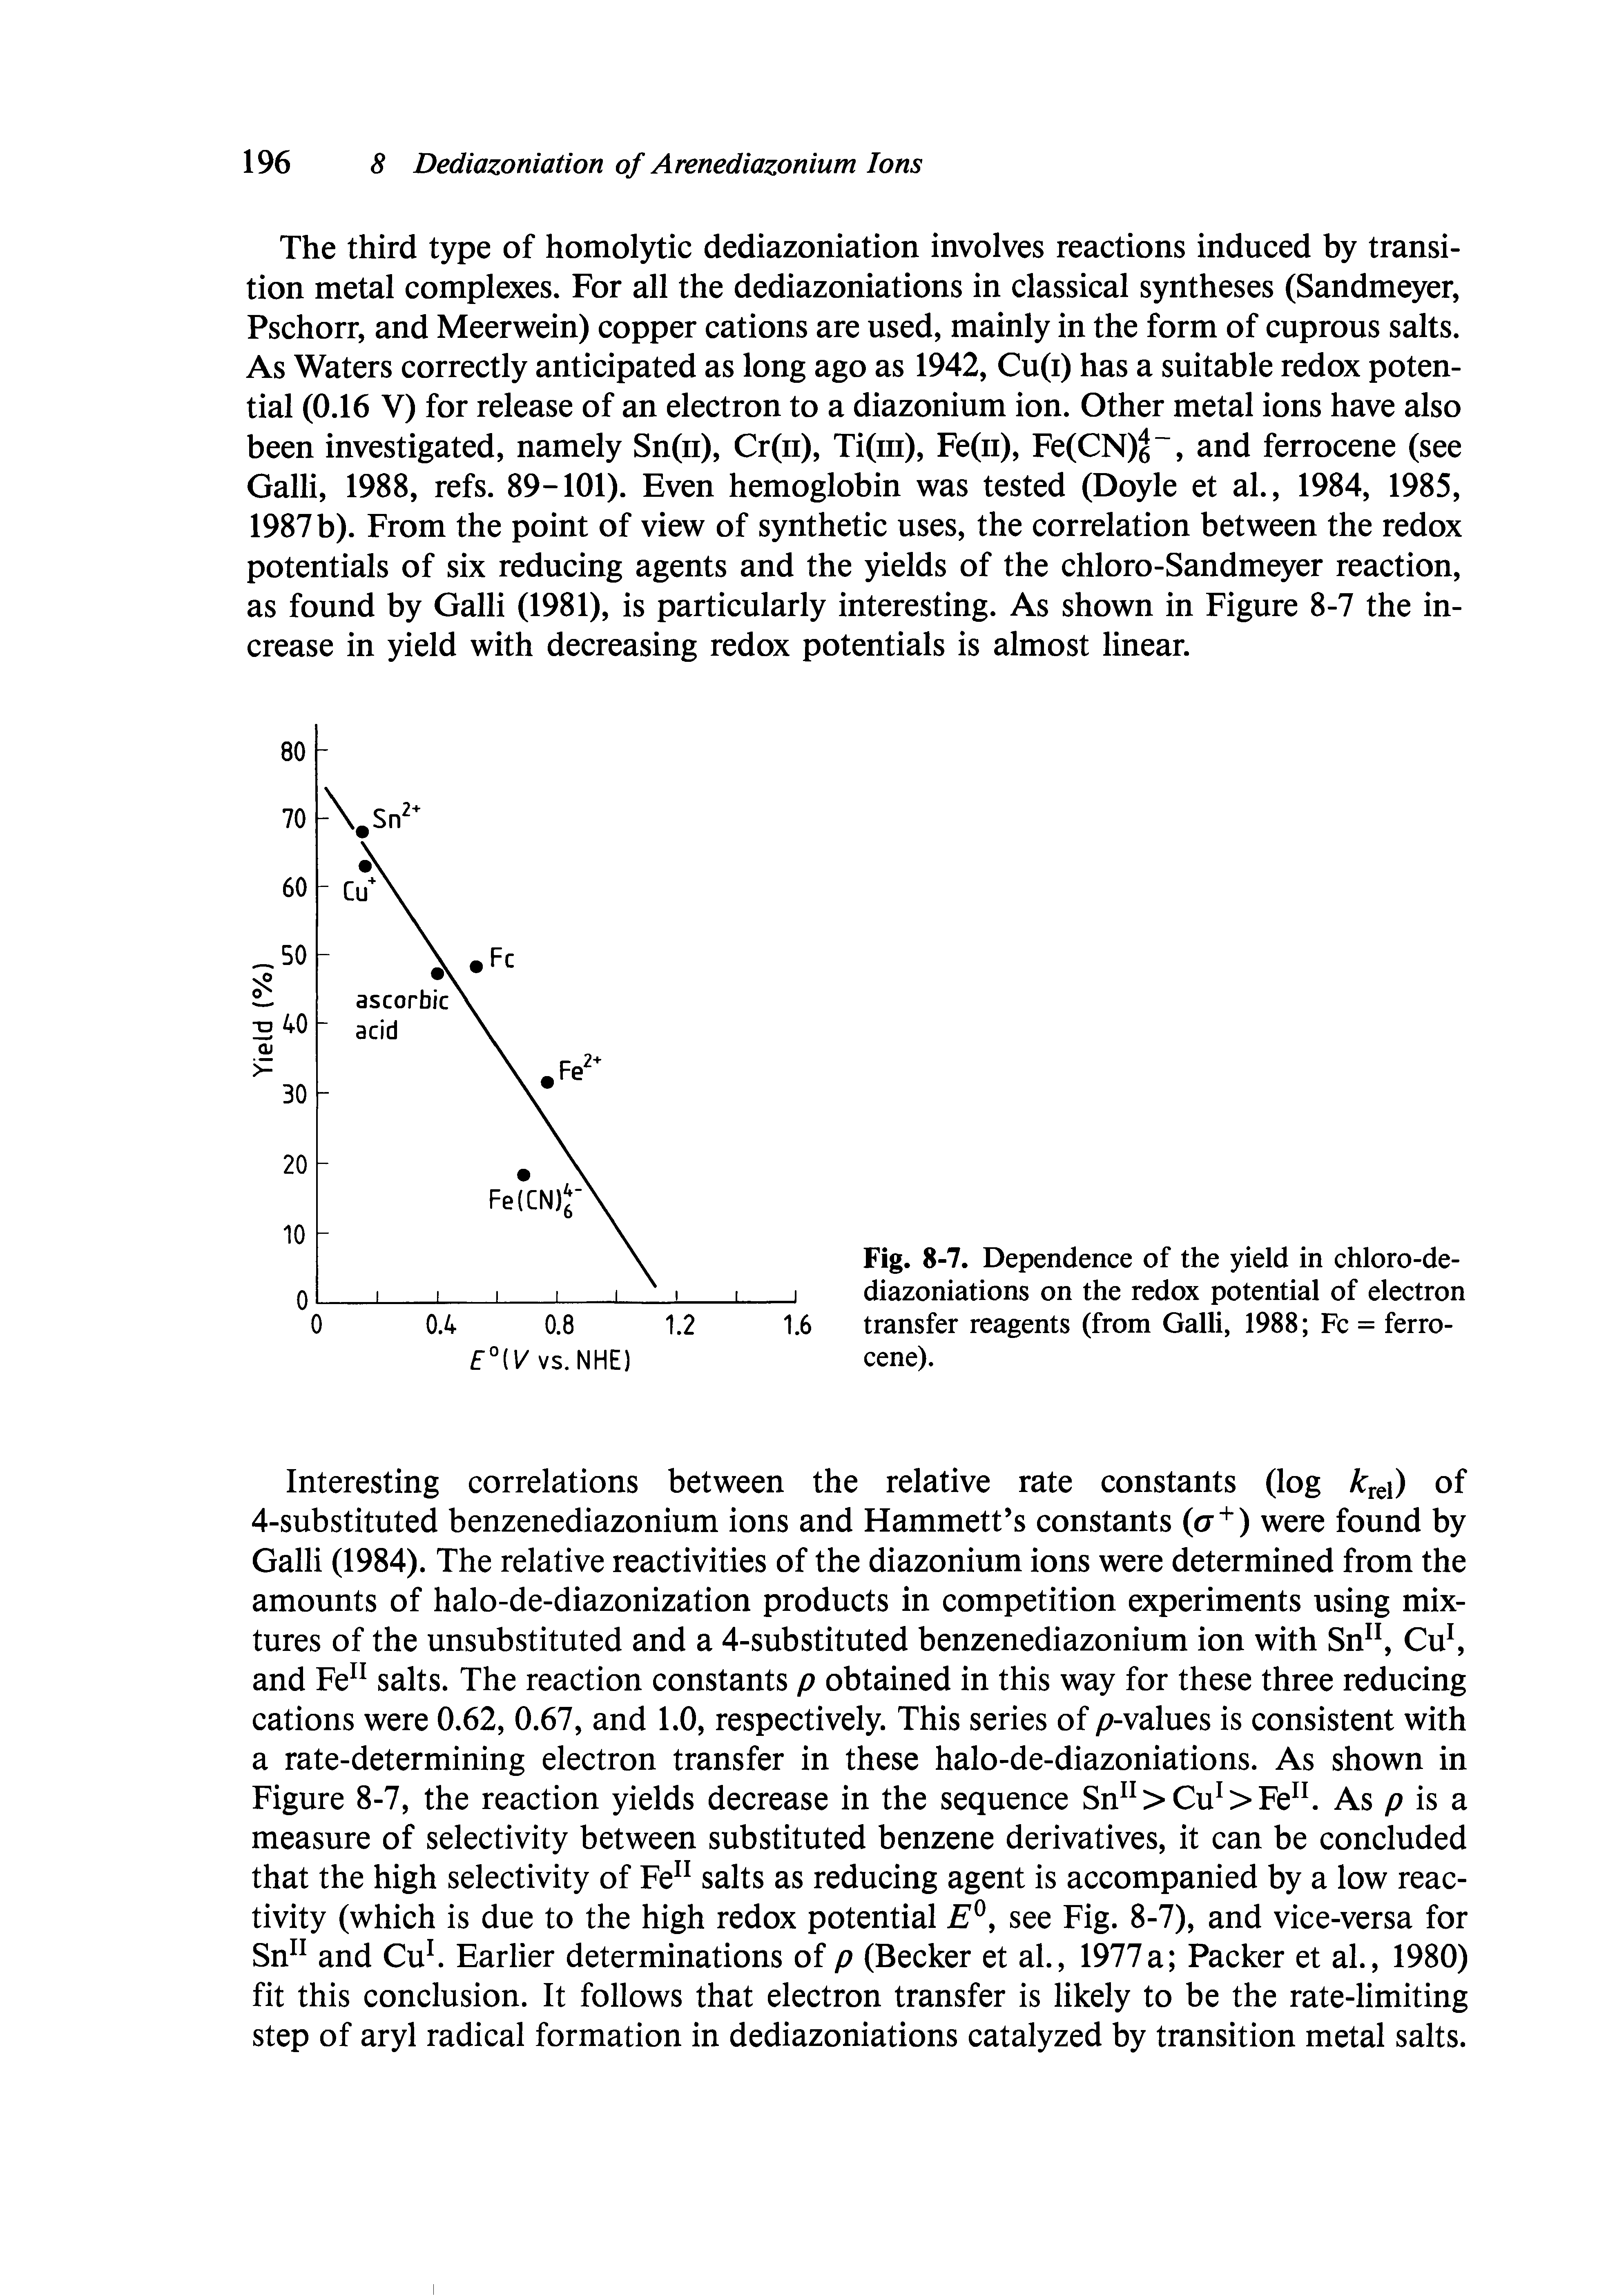 Fig. 8-7. Dependence of the yield in chloro-de-diazoniations on the redox potential of electron transfer reagents (from Galli, 1988 Fc = ferrocene).